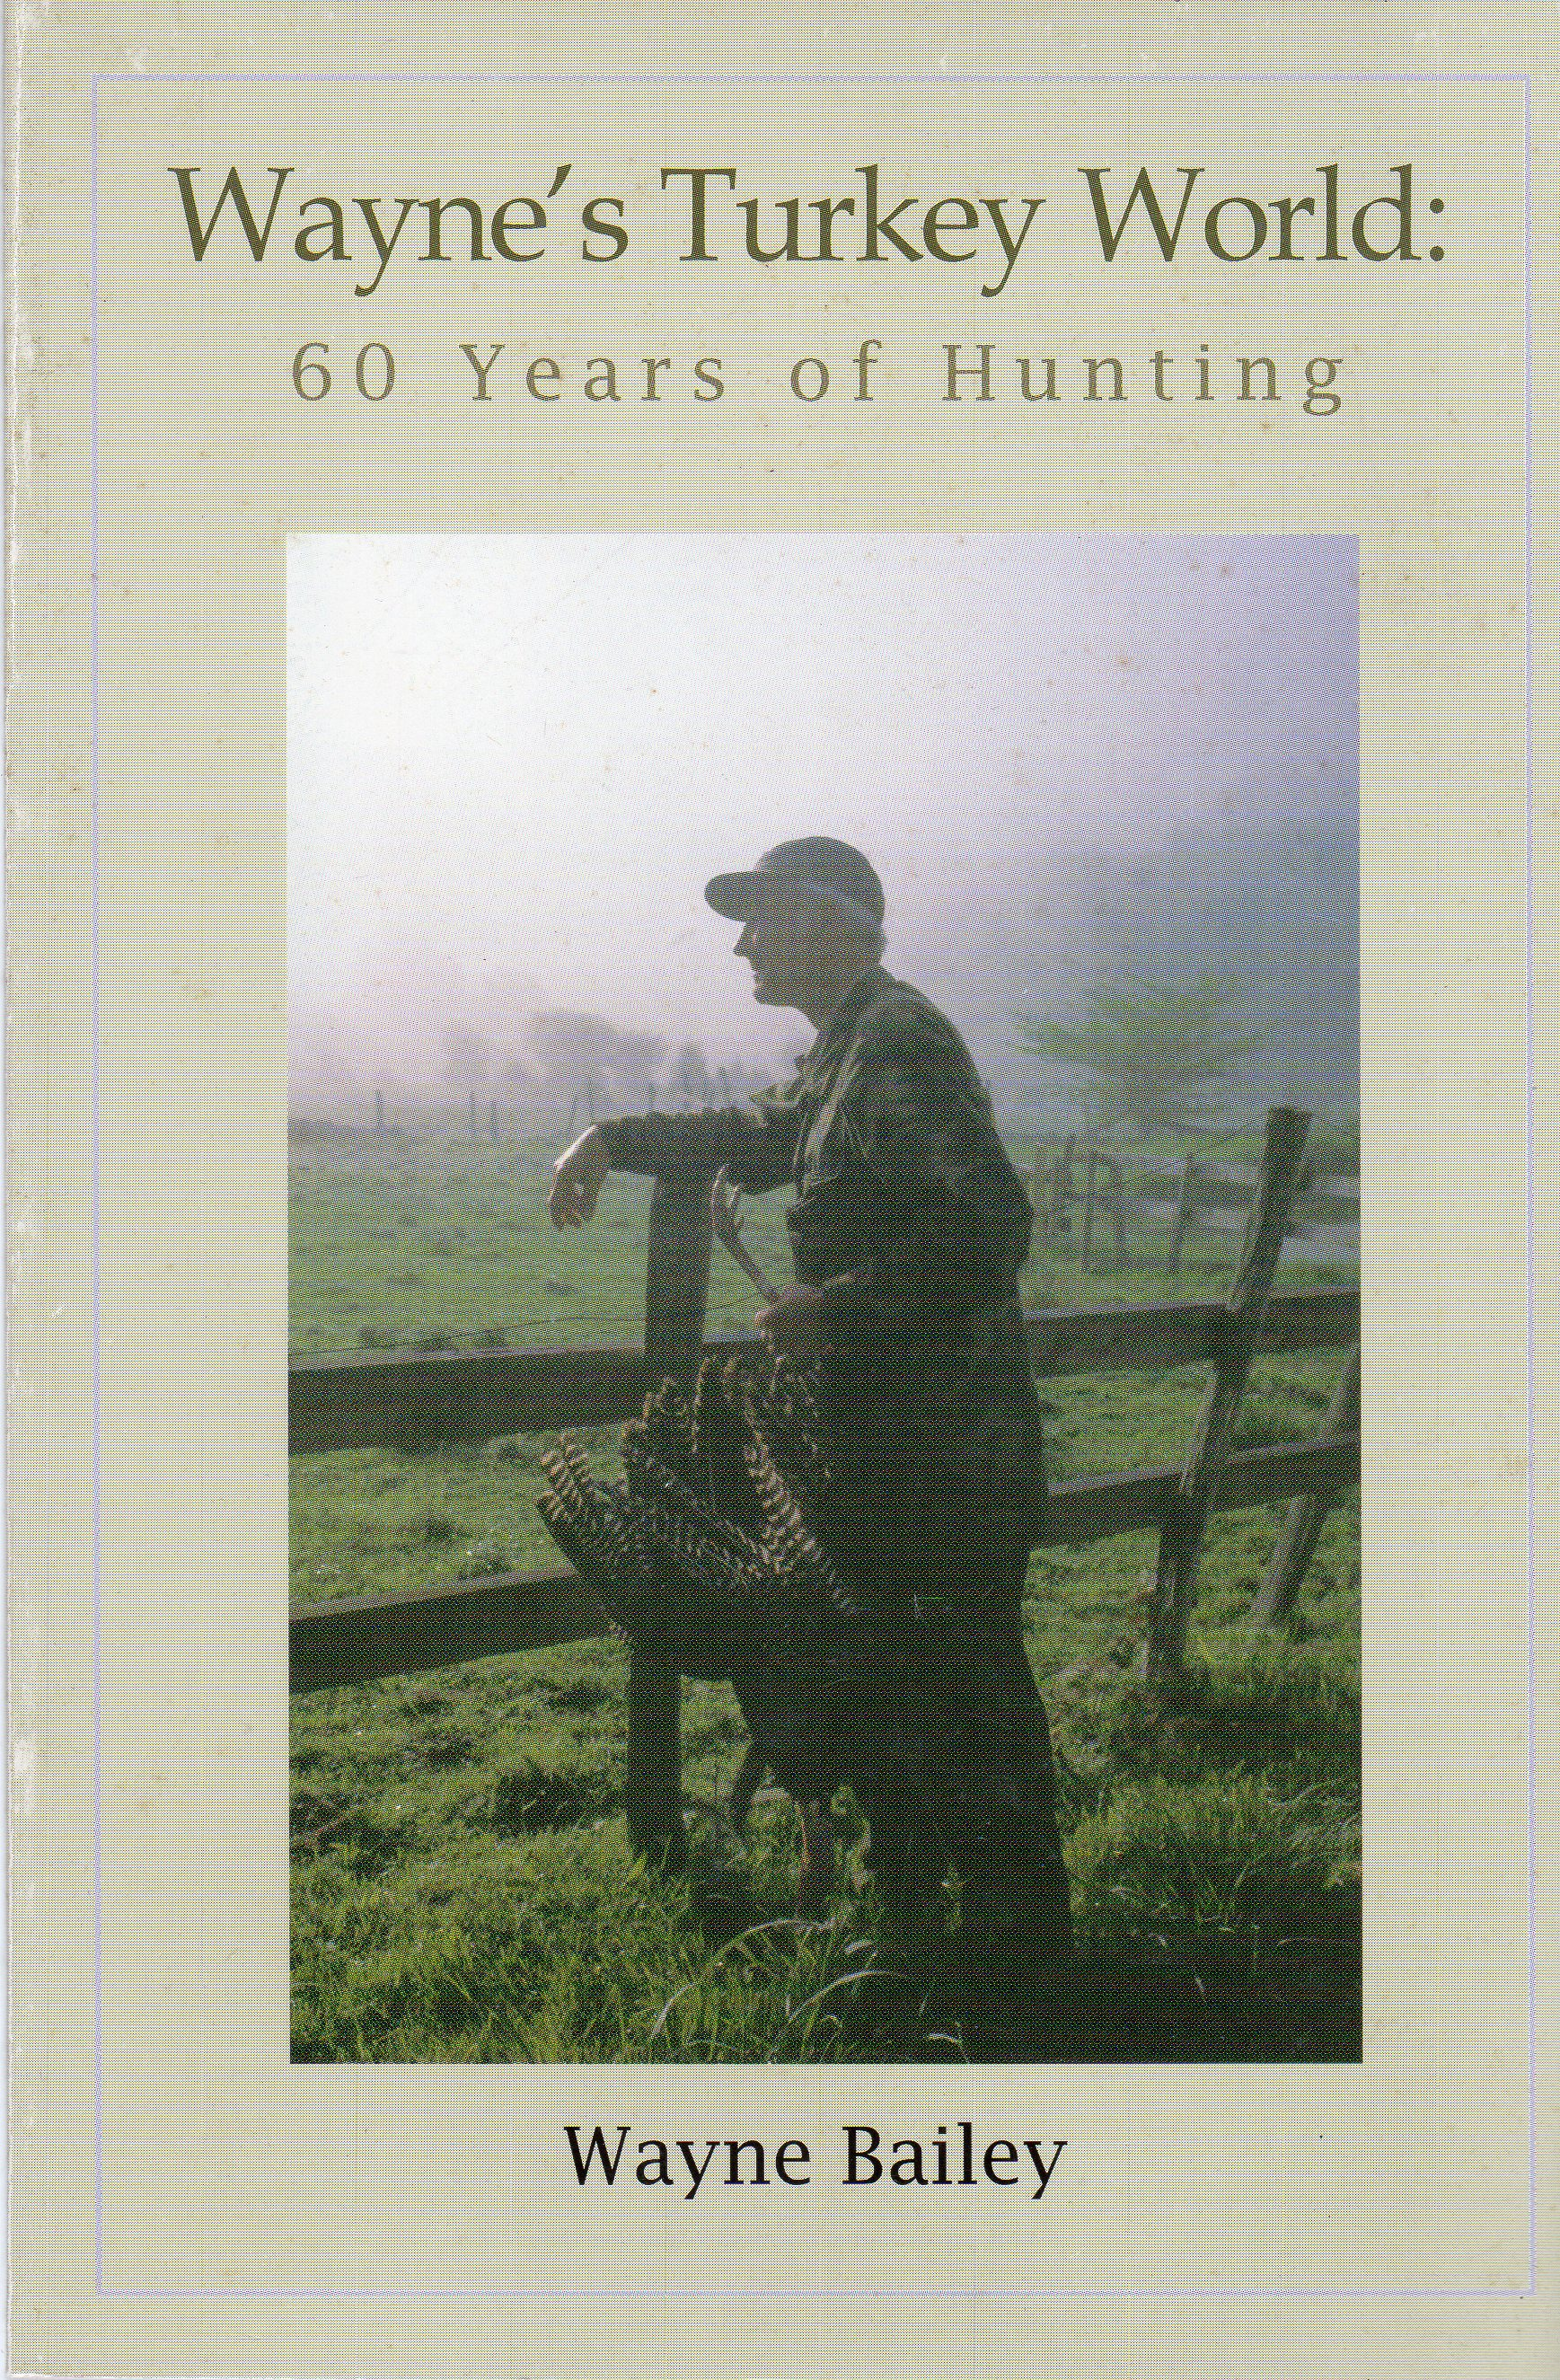 front cover of Wayne's turkey world book